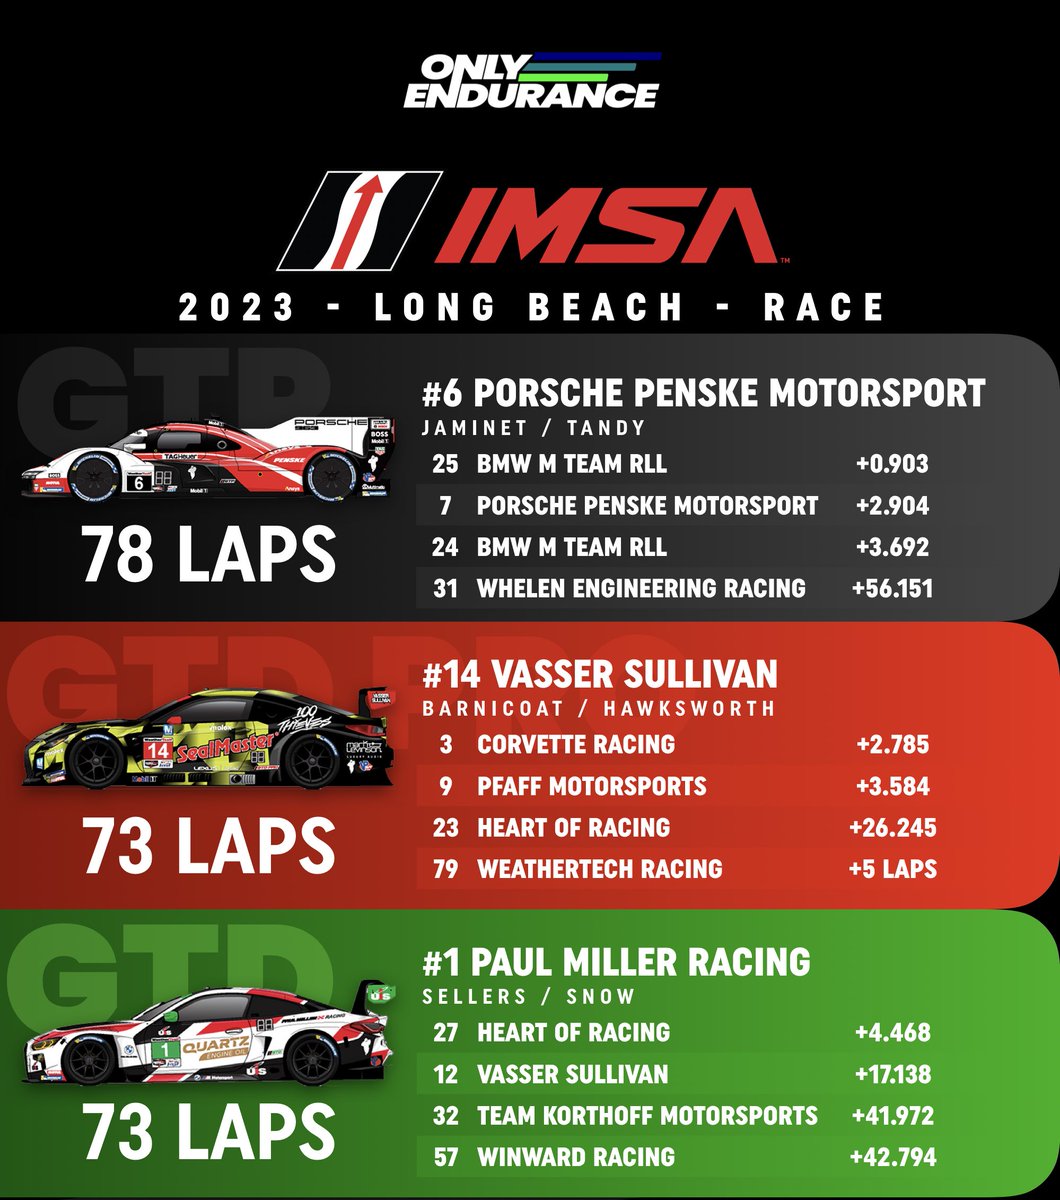 🇺🇸 𝙄𝙈𝙎𝘼 - Long Beach - Race 🏁

Porsche score their first win with the 963!

#6 Porsche of Tandy/Jaminet survived a penultimate lap divebomb from the #10 WTR Acura.

#14 VS Lexus goes from pole-win, as #1 Paul Miller BMW scores third consecutive LB win.
#IMSA/#AcuraGPLB